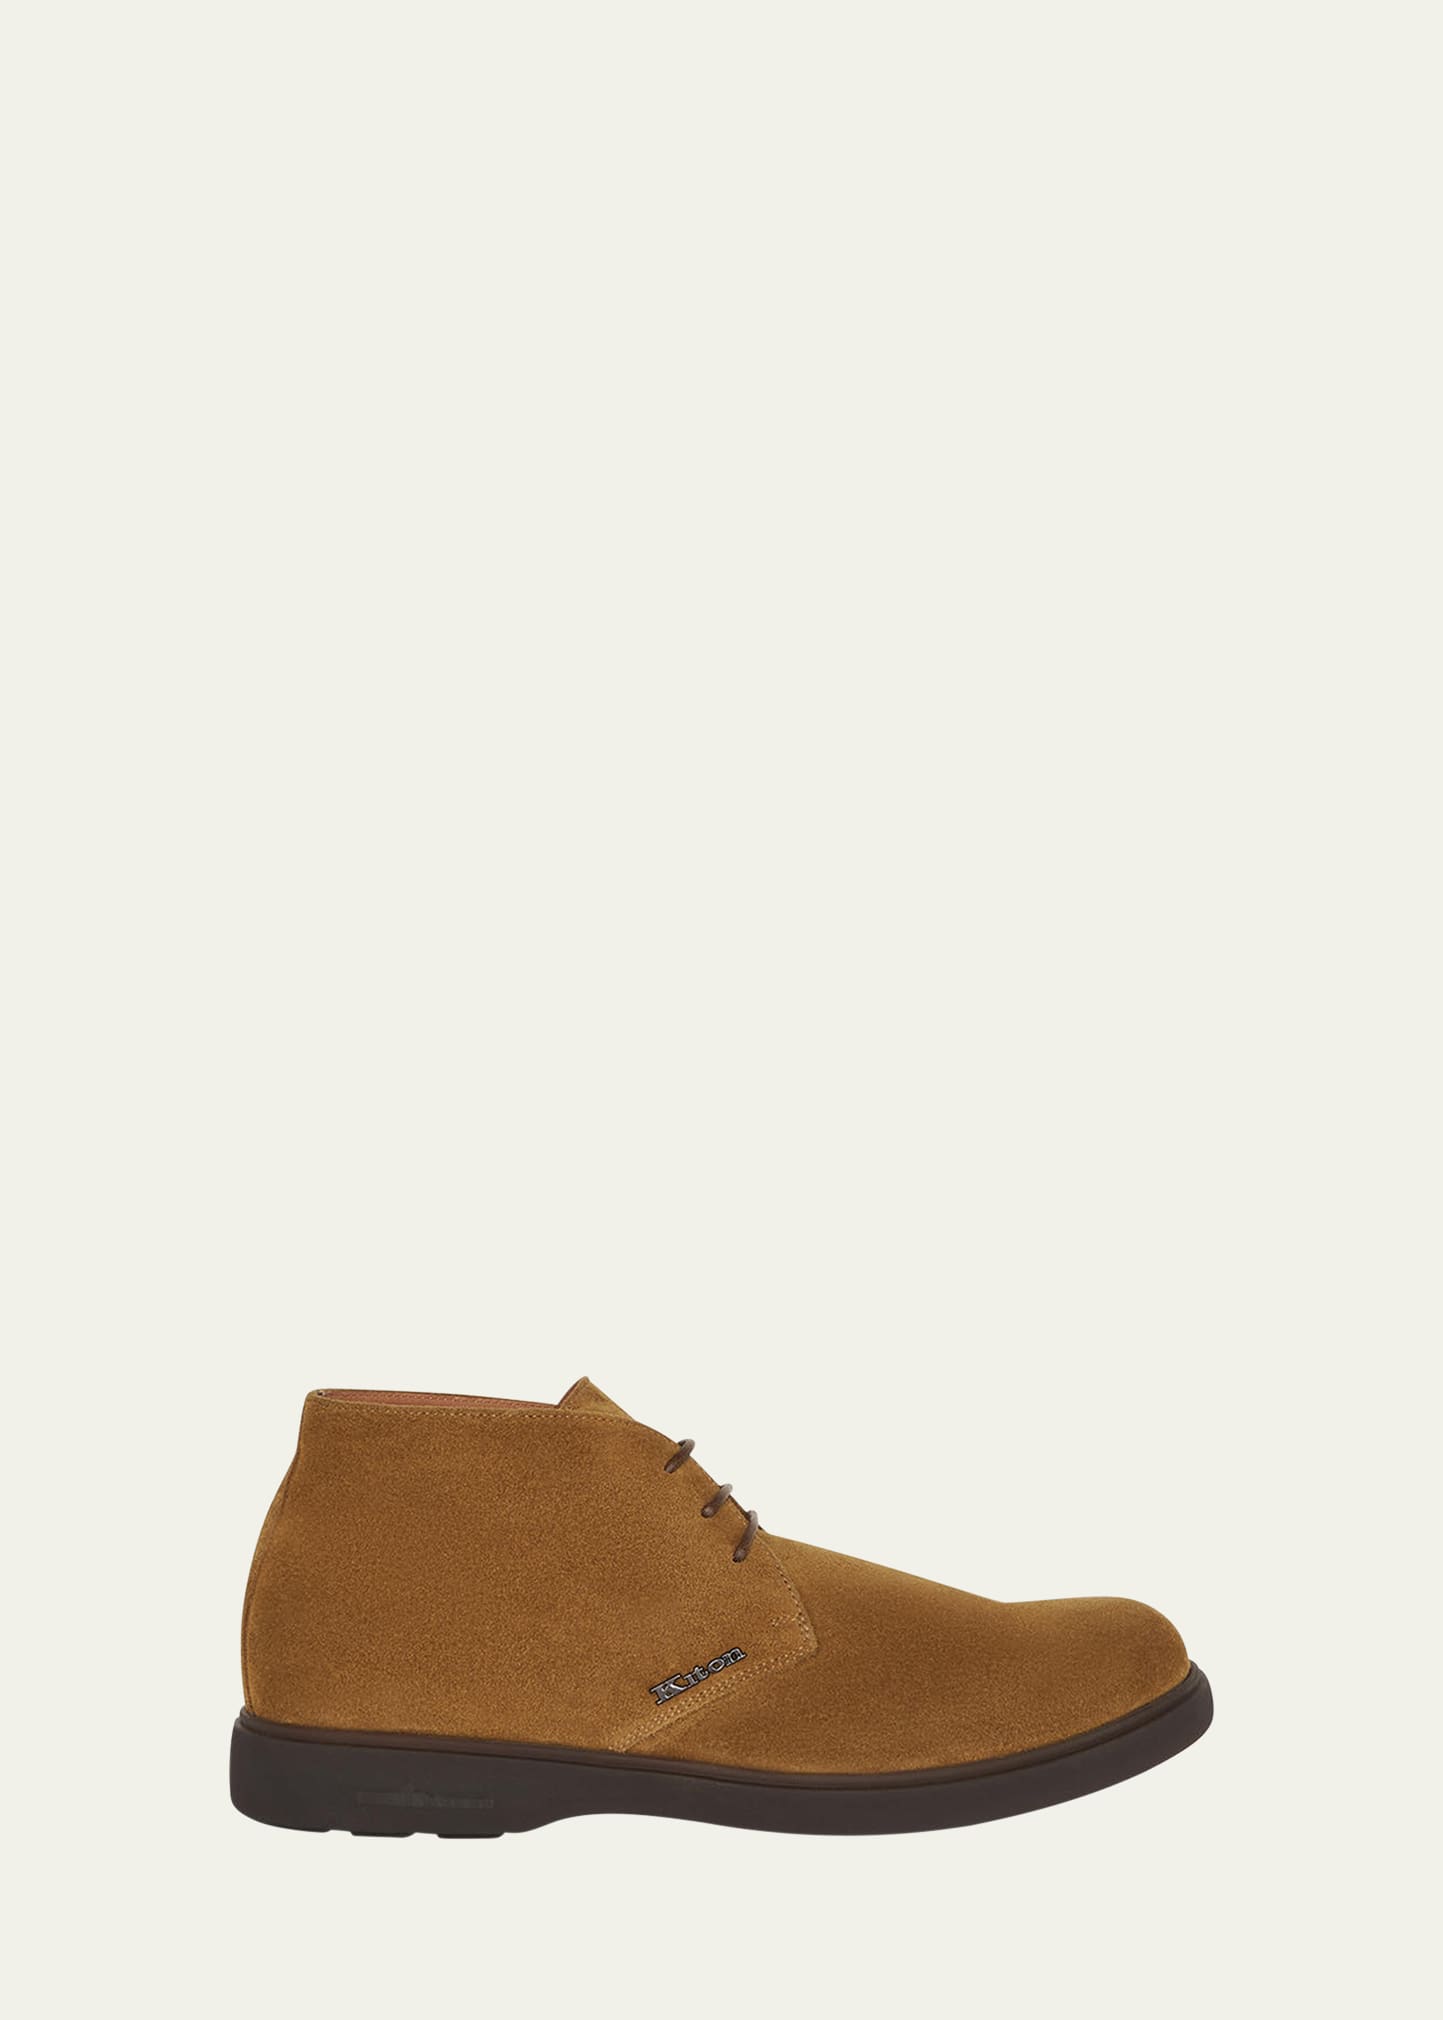 Kiton Men's Suede Vibram-sole Chukka Boots In Brown